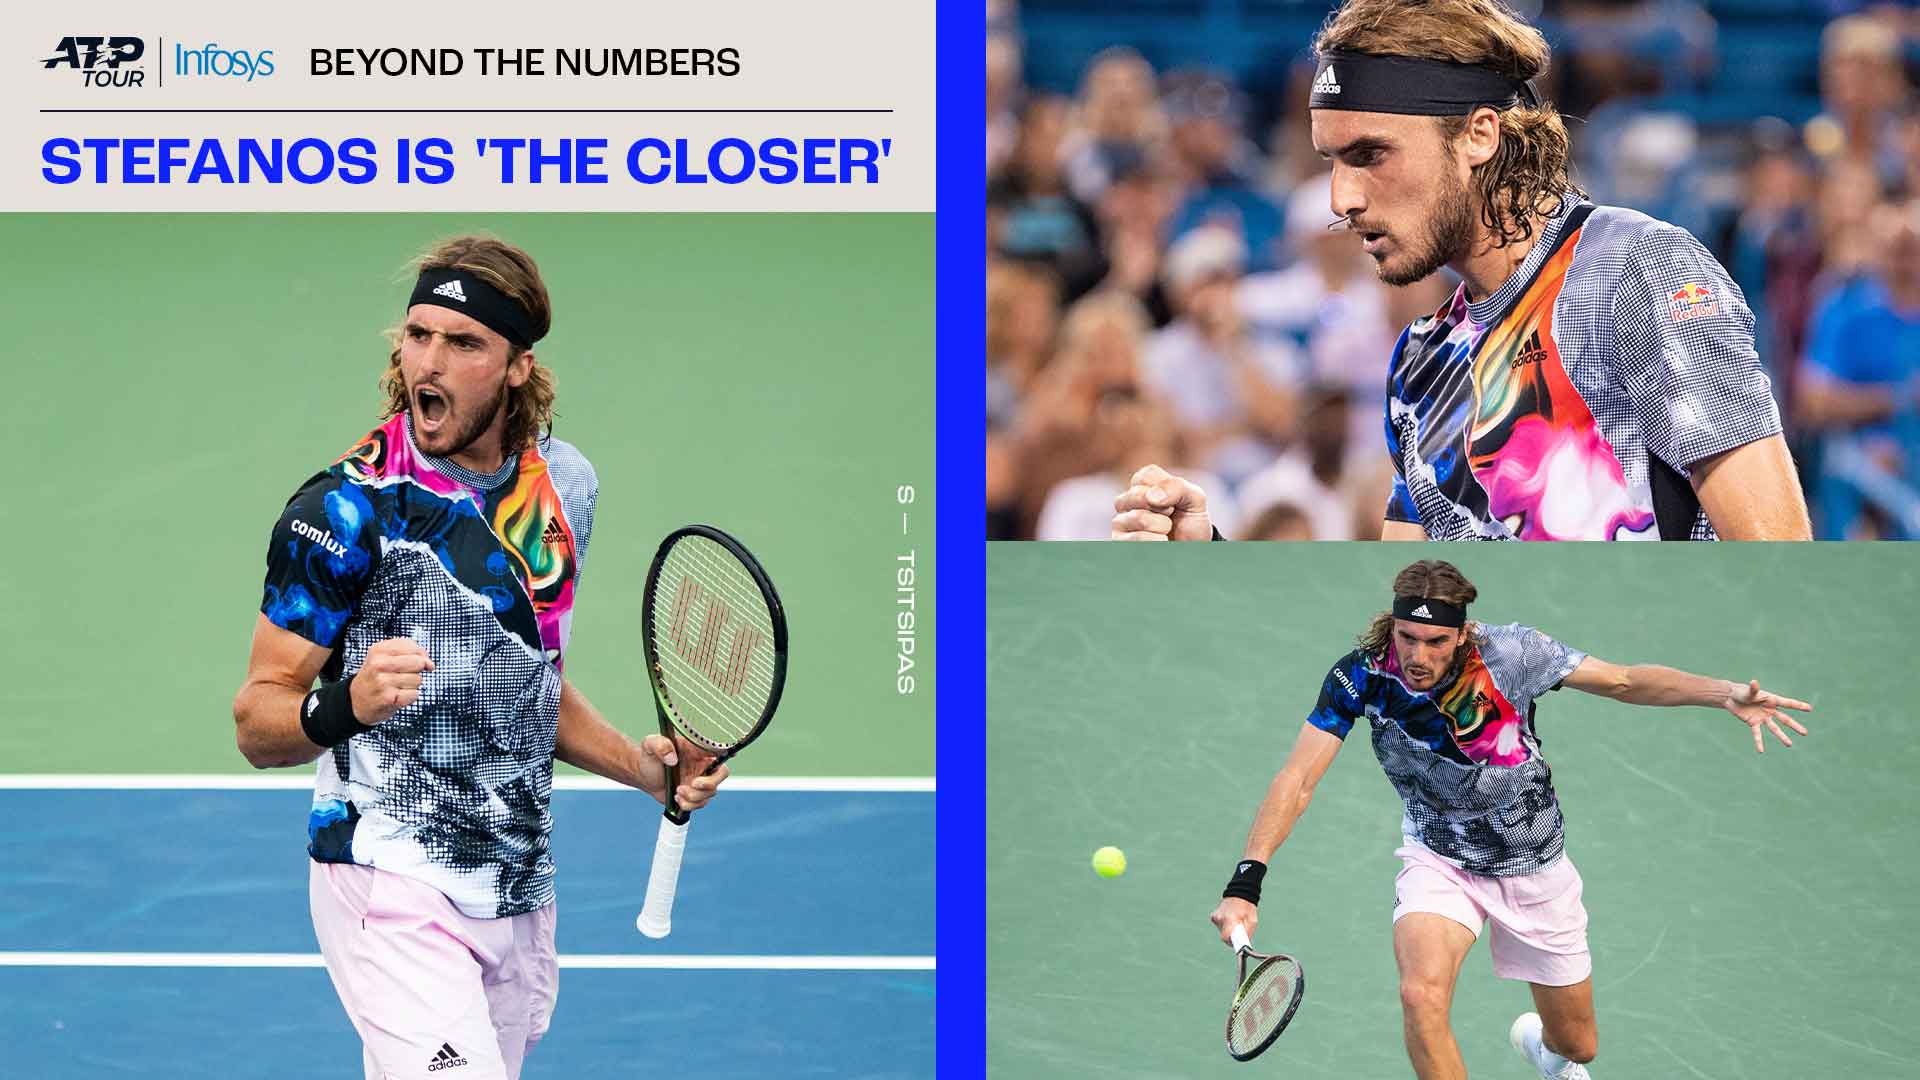 Stefanos Tsitsipas has surged to a 30/0, 40/0, and 40/15 lead 946 times this season and has only dropped serve seven times from these three specific point scores.